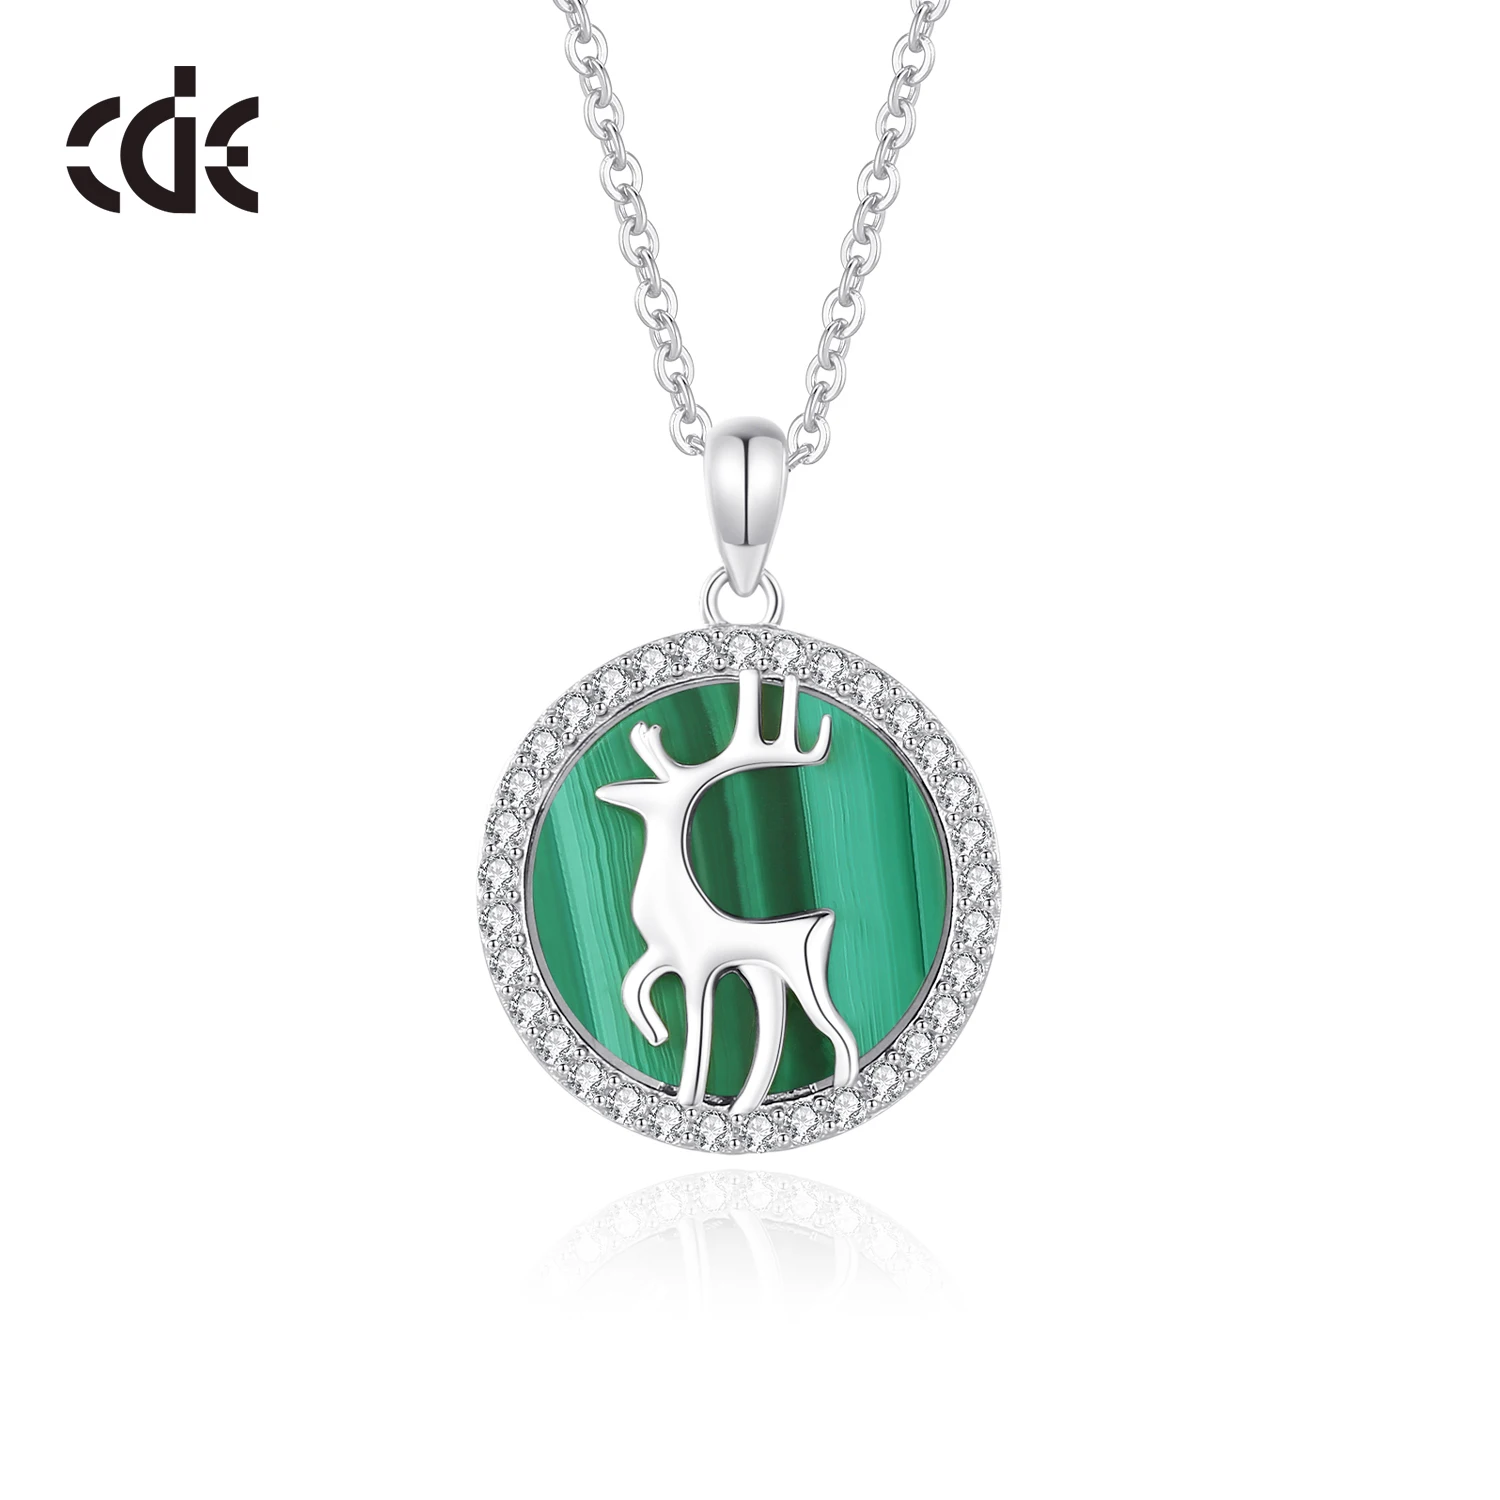 CDE YL5445 Fine 925 Sterling Silver Jewelry Wholesale Turquoise Deer Shape Gold Plated Pendant Necklace For Women Christmas Gift